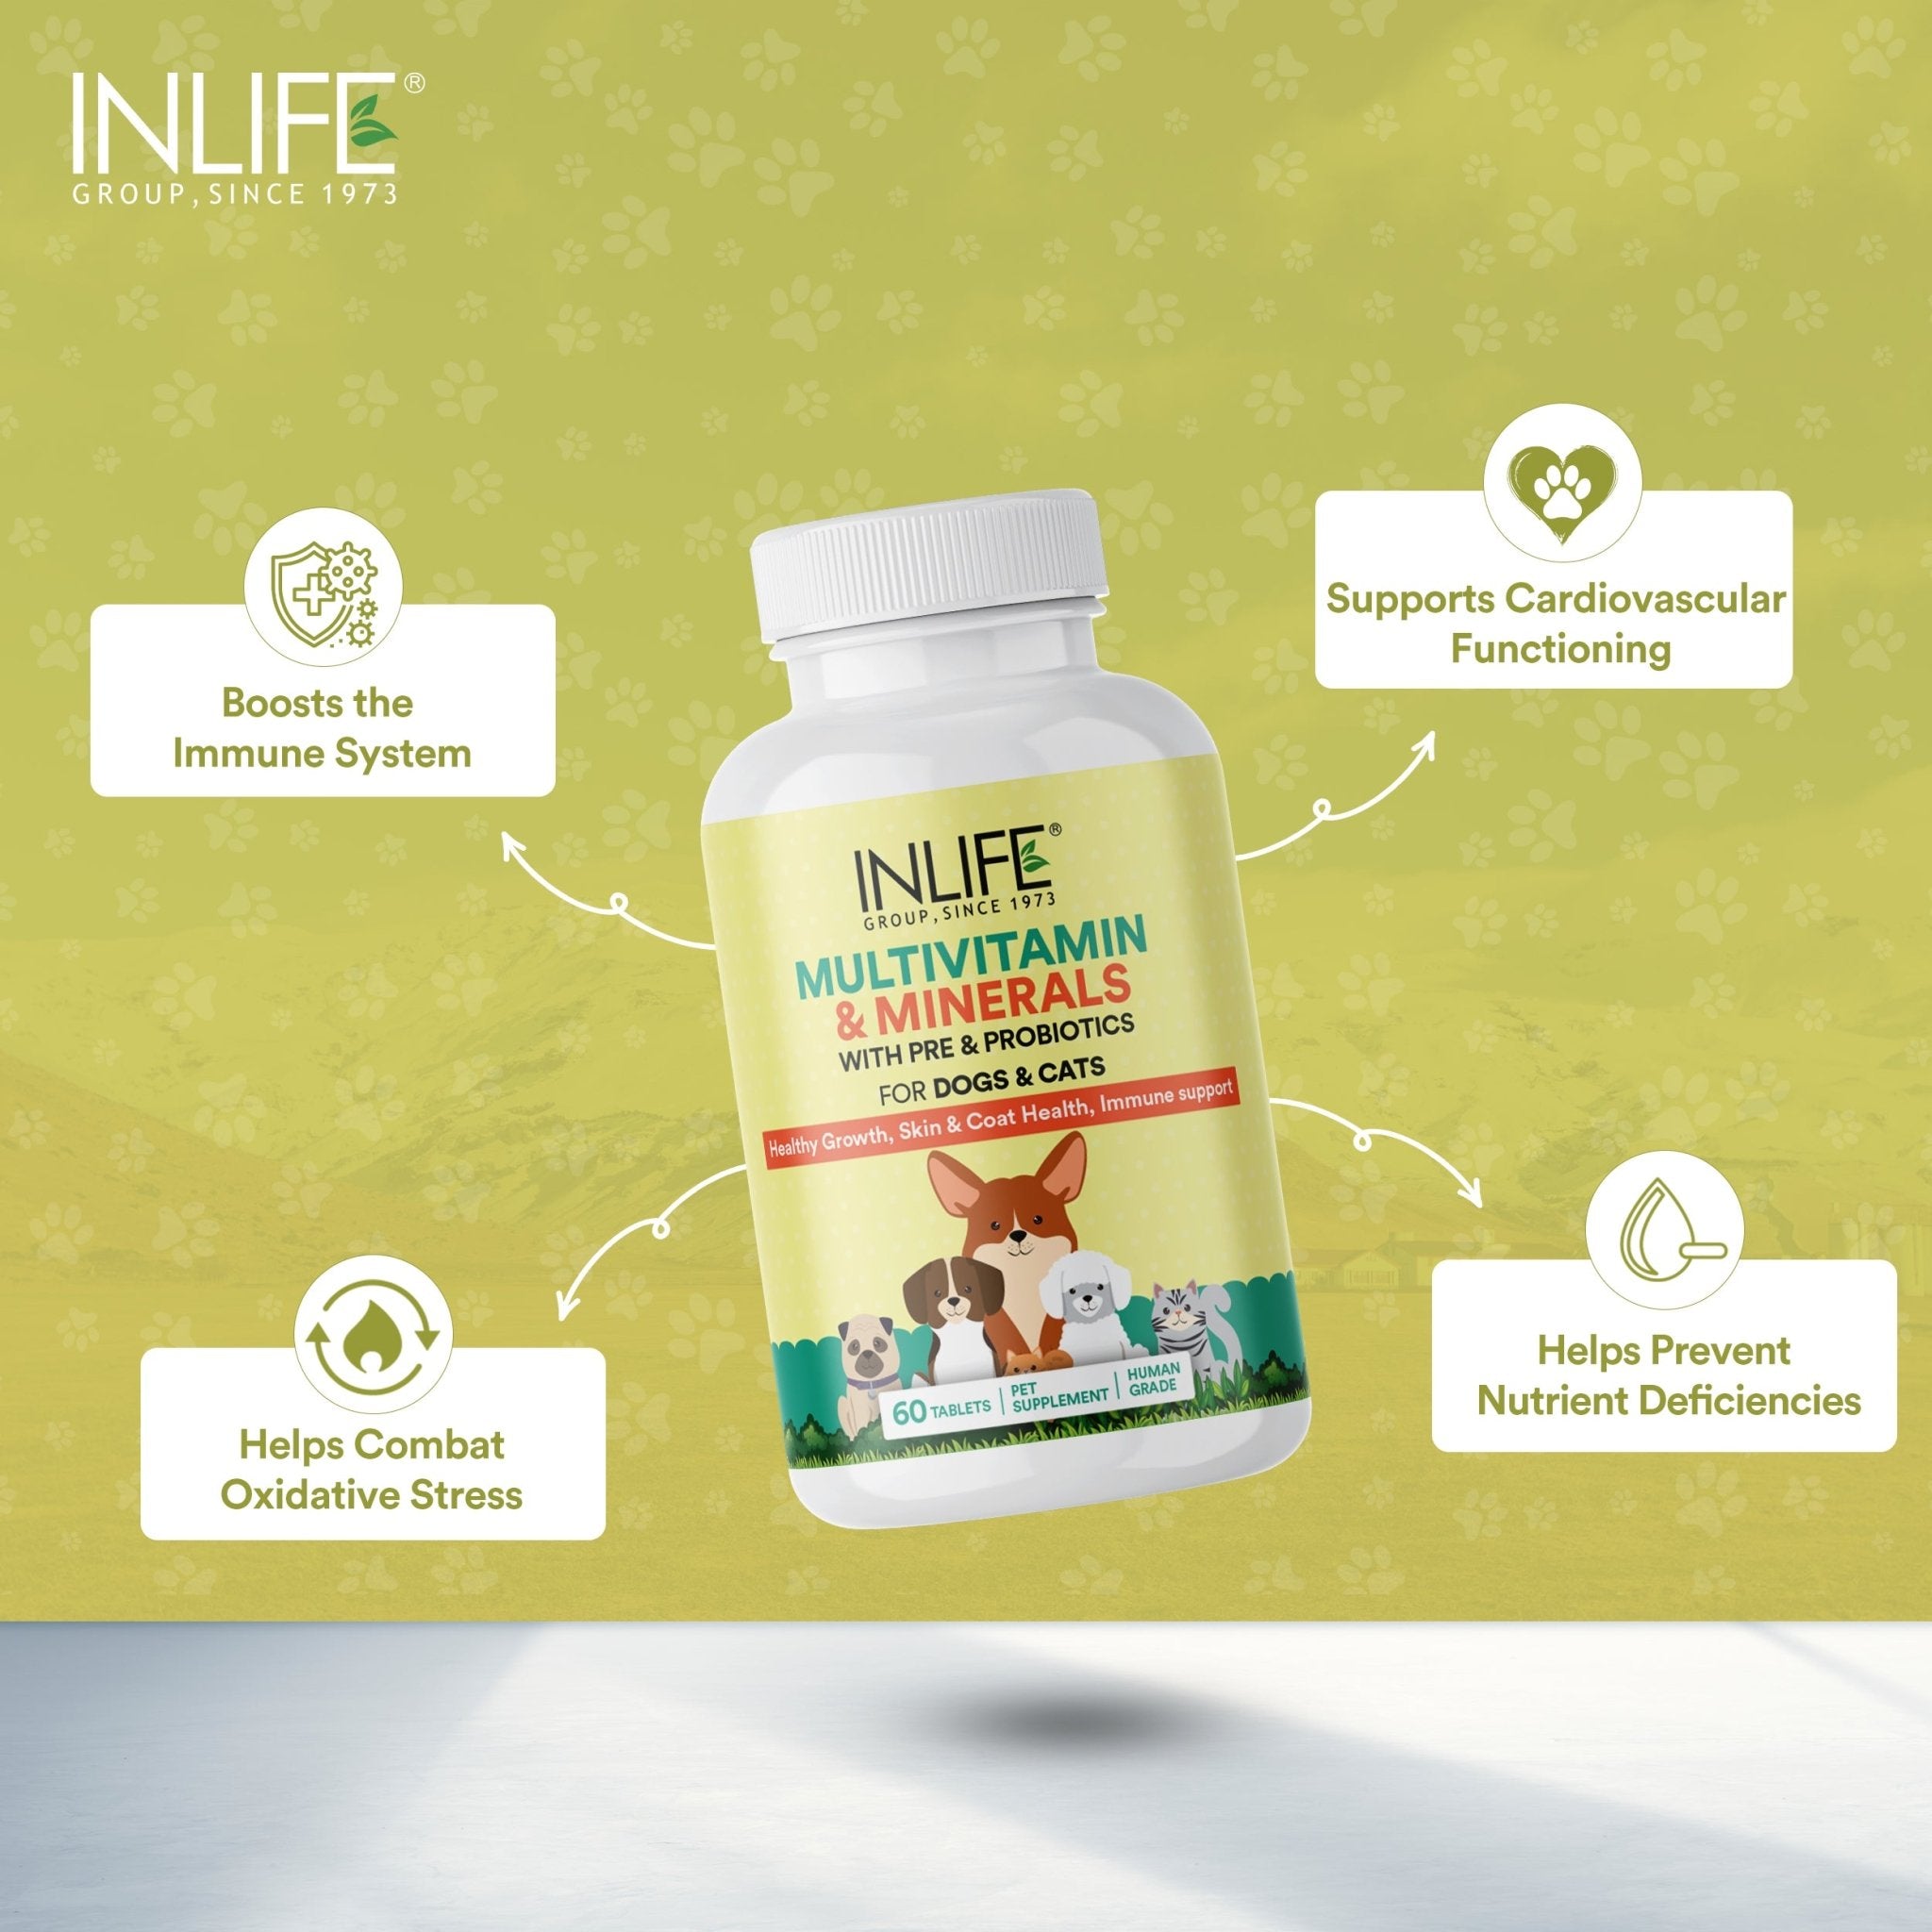 INLIFE Multivitamins Supplement for Dogs for Healthy Growth, Skin & Coat - 60 Tablets - Inlife Pharma Private Limited